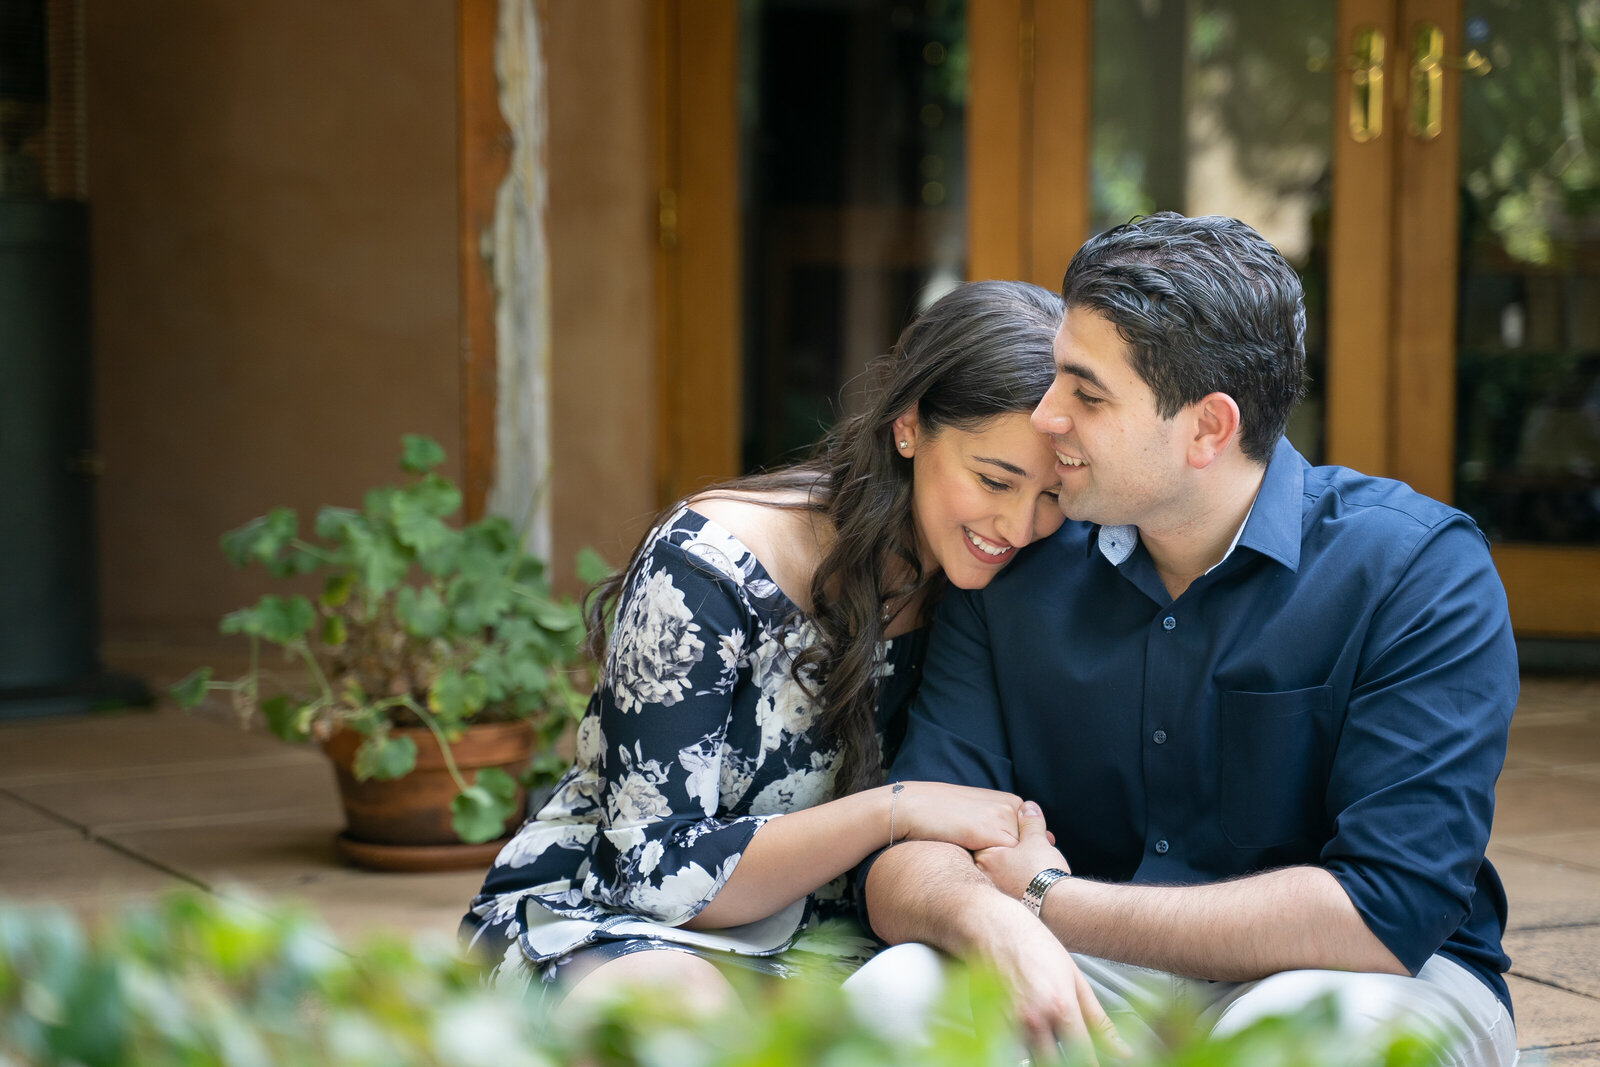 Adelaide_DreamTeamImaging_Engagement _Pre_Wedding_Photography_14